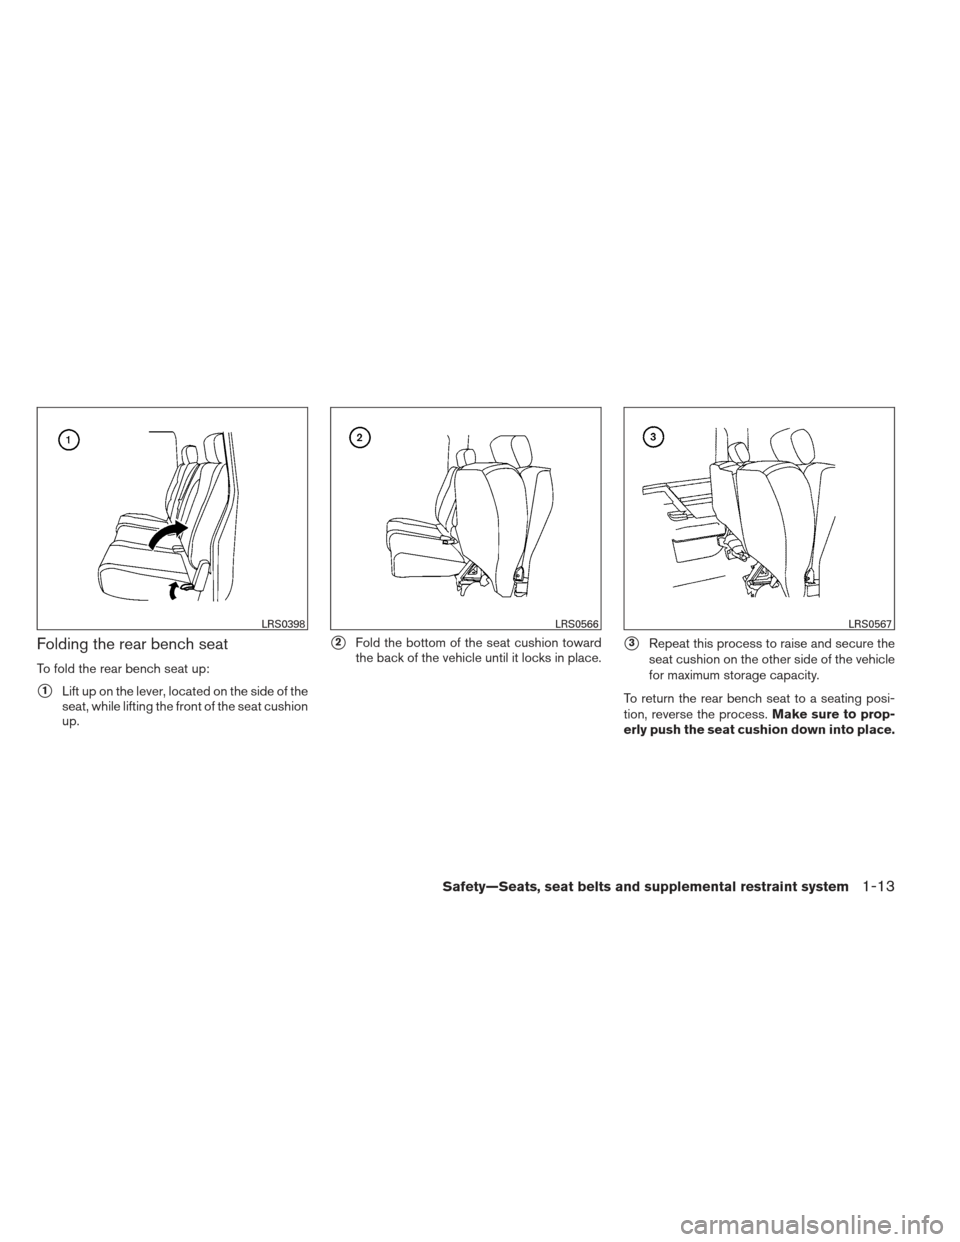 NISSAN FRONTIER 2013 D40 / 2.G Owners Guide Folding the rear bench seat
To fold the rear bench seat up:
1Lift up on the lever, located on the side of the
seat, while lifting the front of the seat cushion
up.
2Fold the bottom of the seat cushi